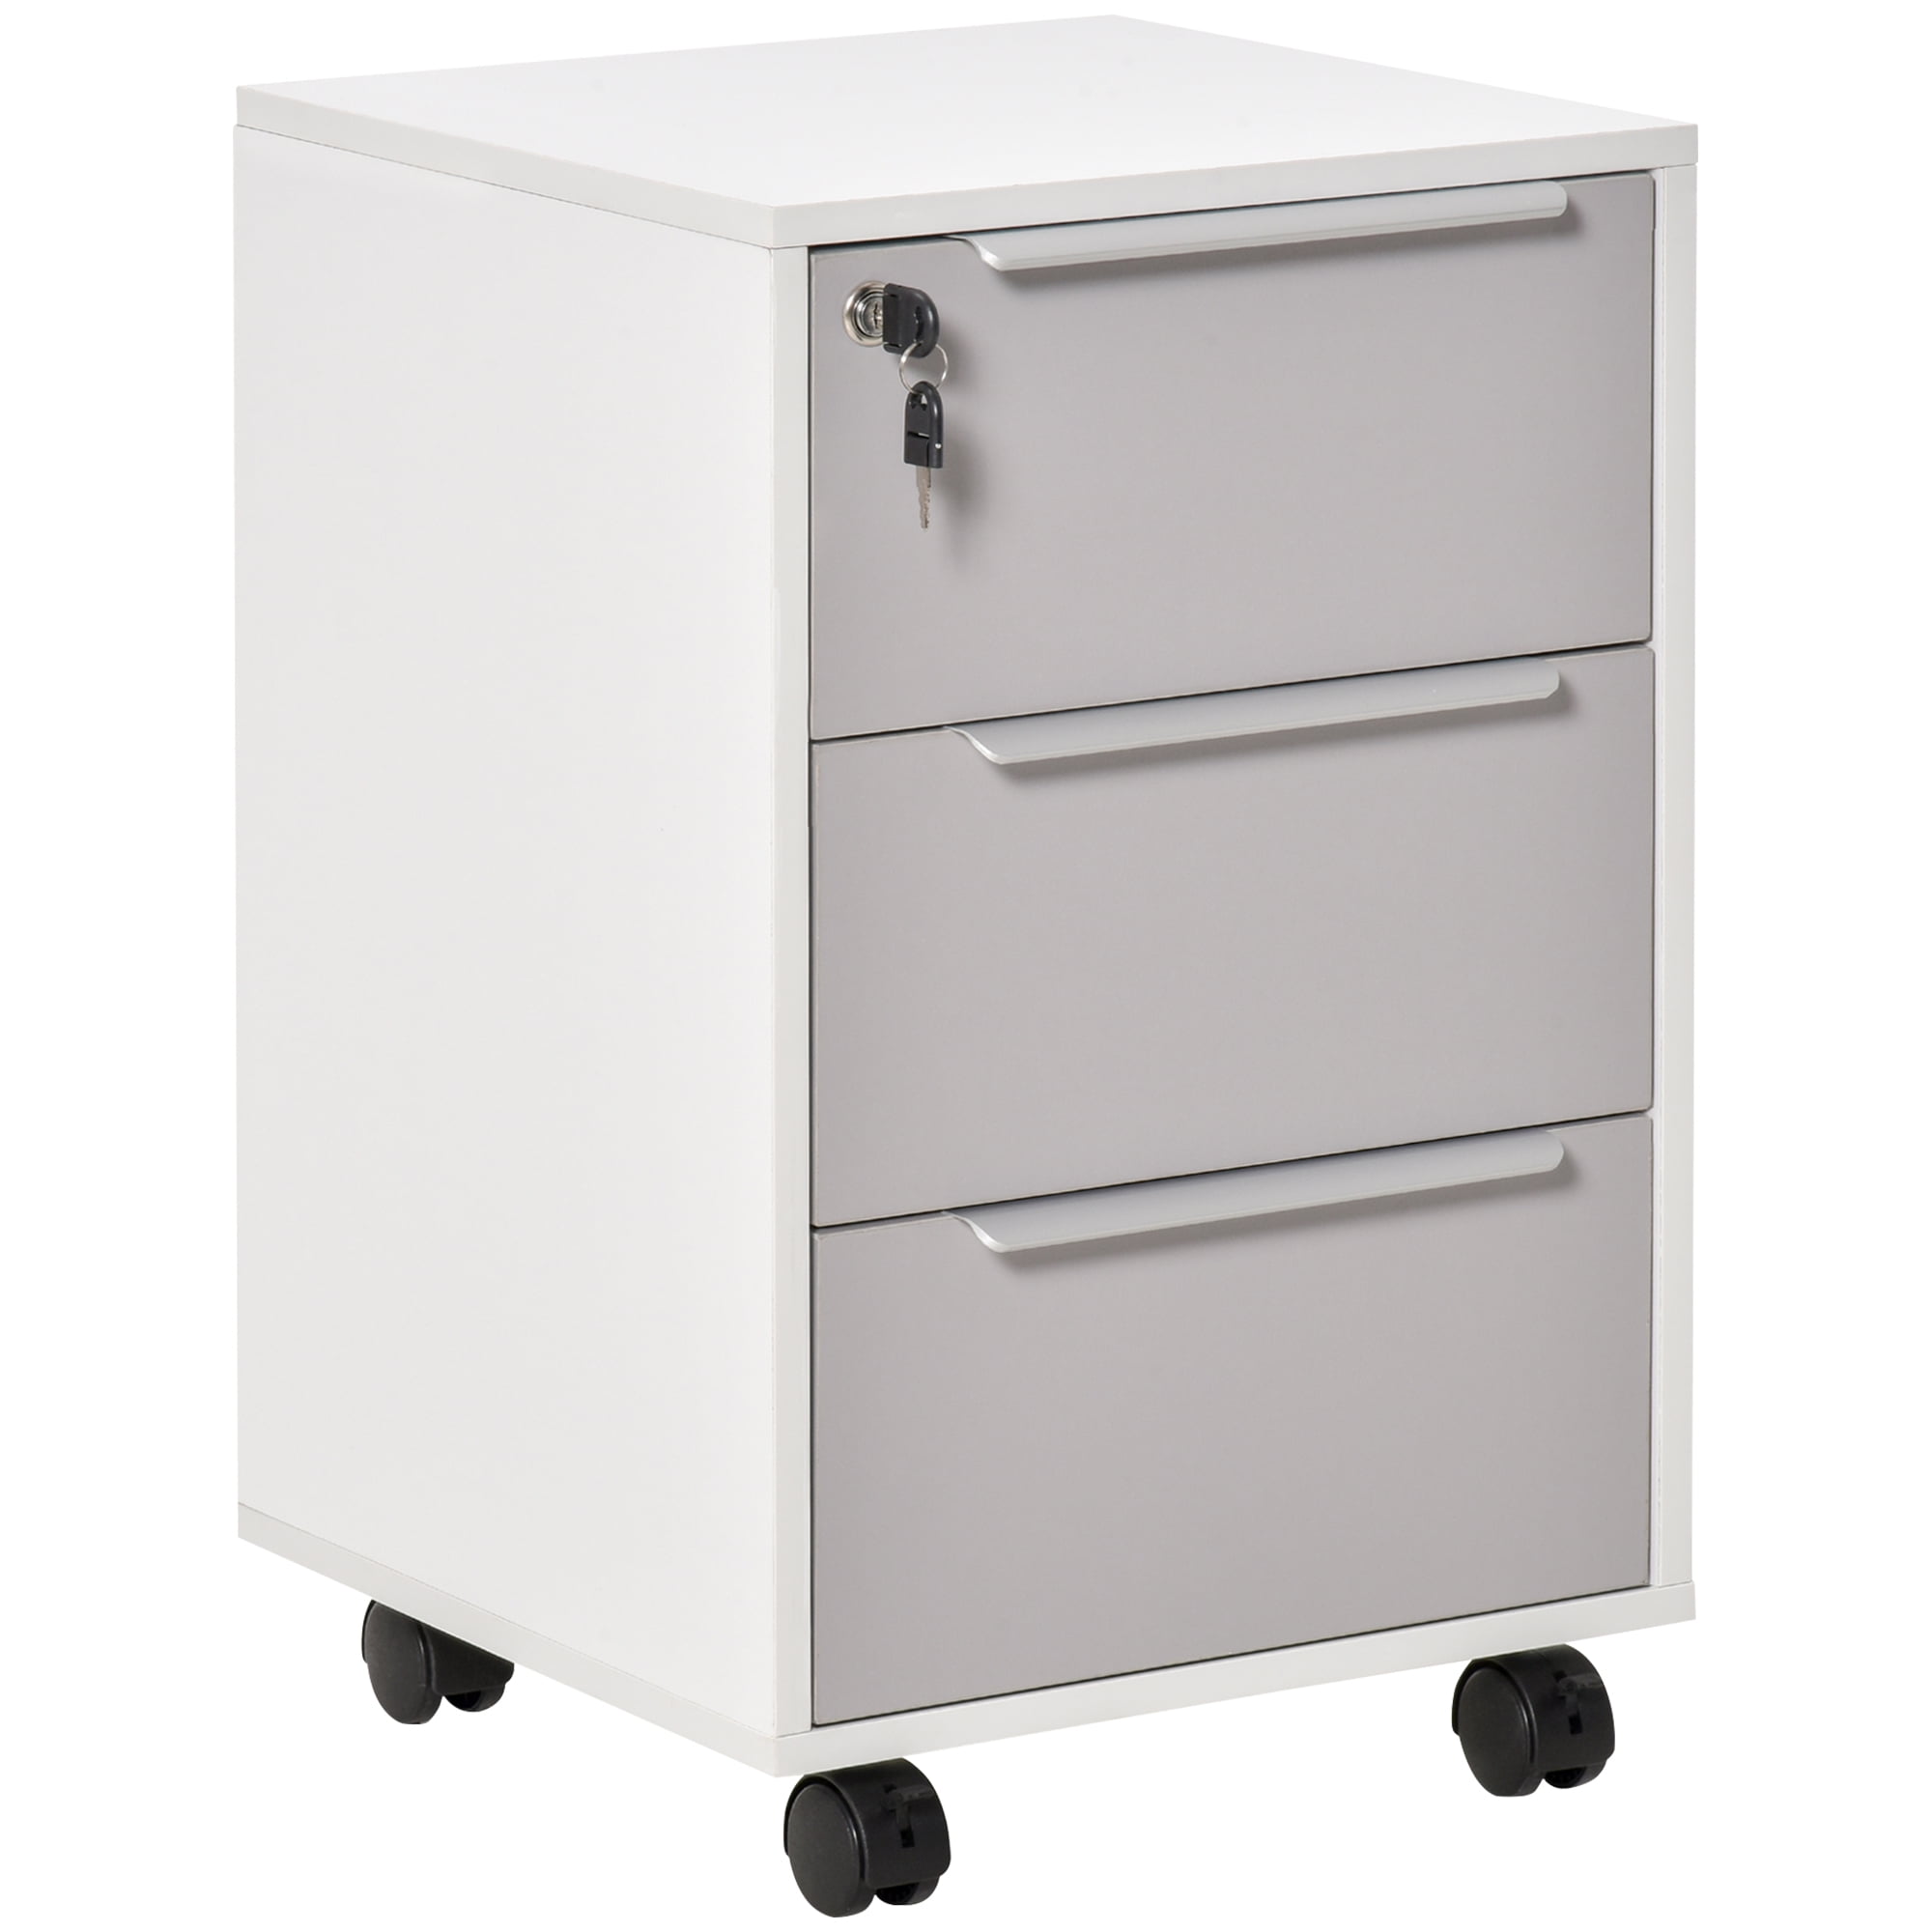 Bedroom and Living Room HOMCOM 3-Drawer Locking File Cabinet Mobile Chest of Drawers Side Table on Wheels for Home Office 